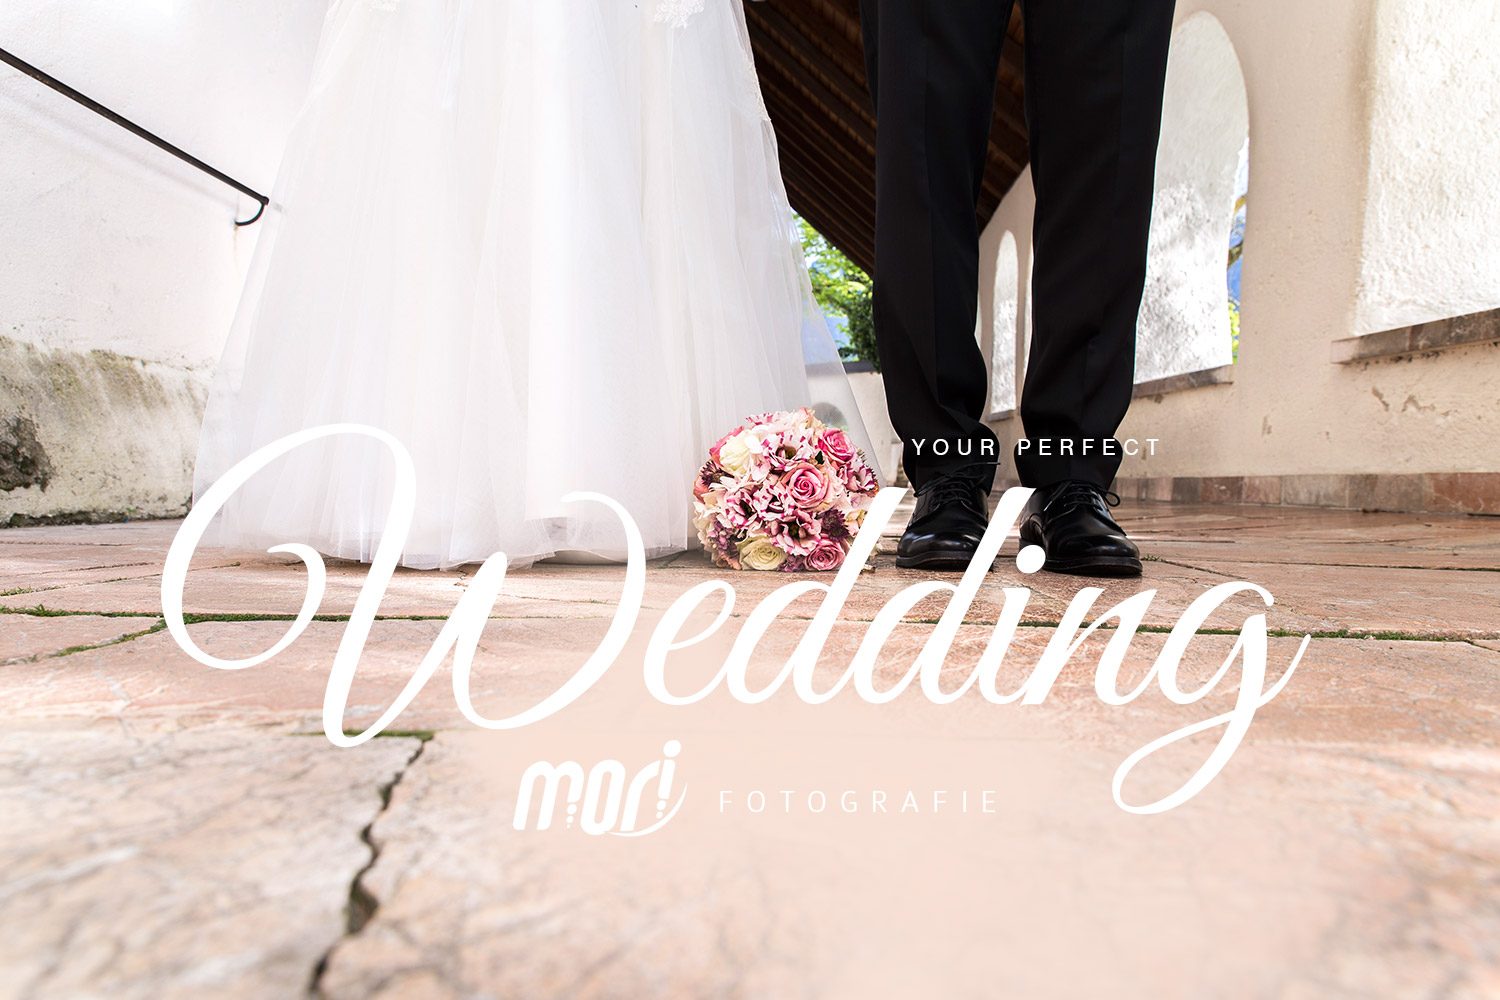 Your perfect wedding - by MORI Fotografie